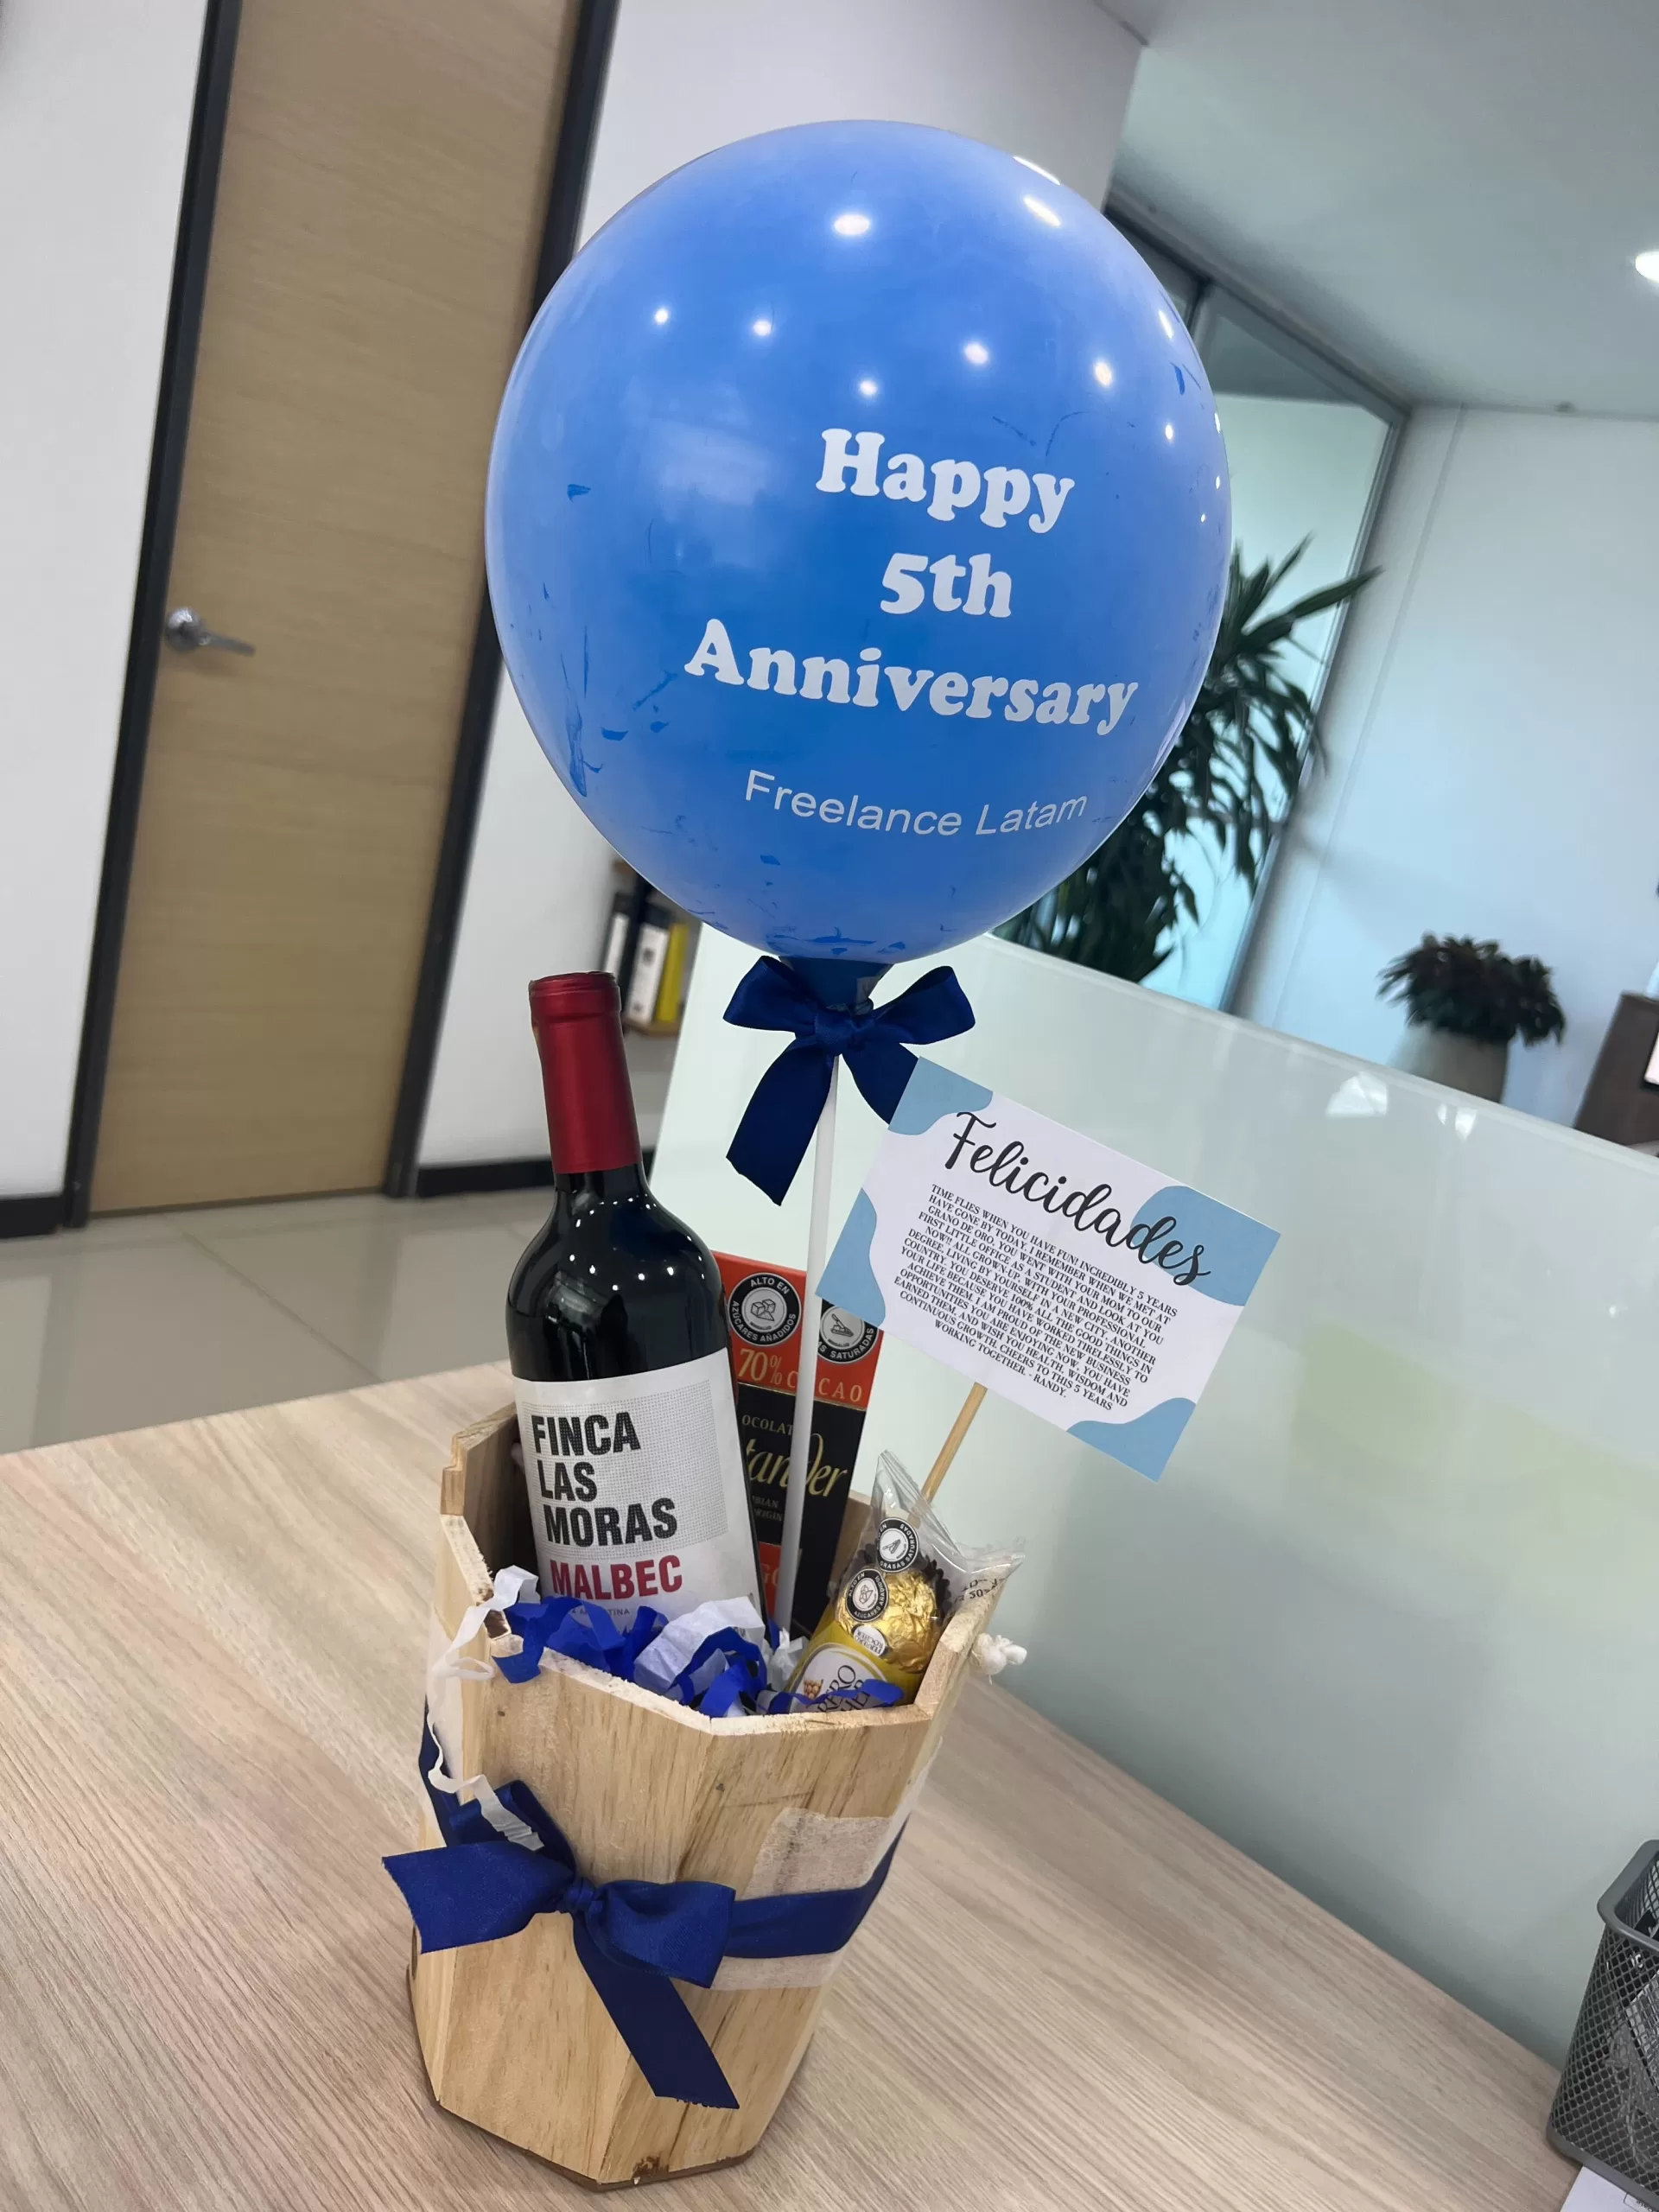 A 5th Anniversary gift given to a remote worker